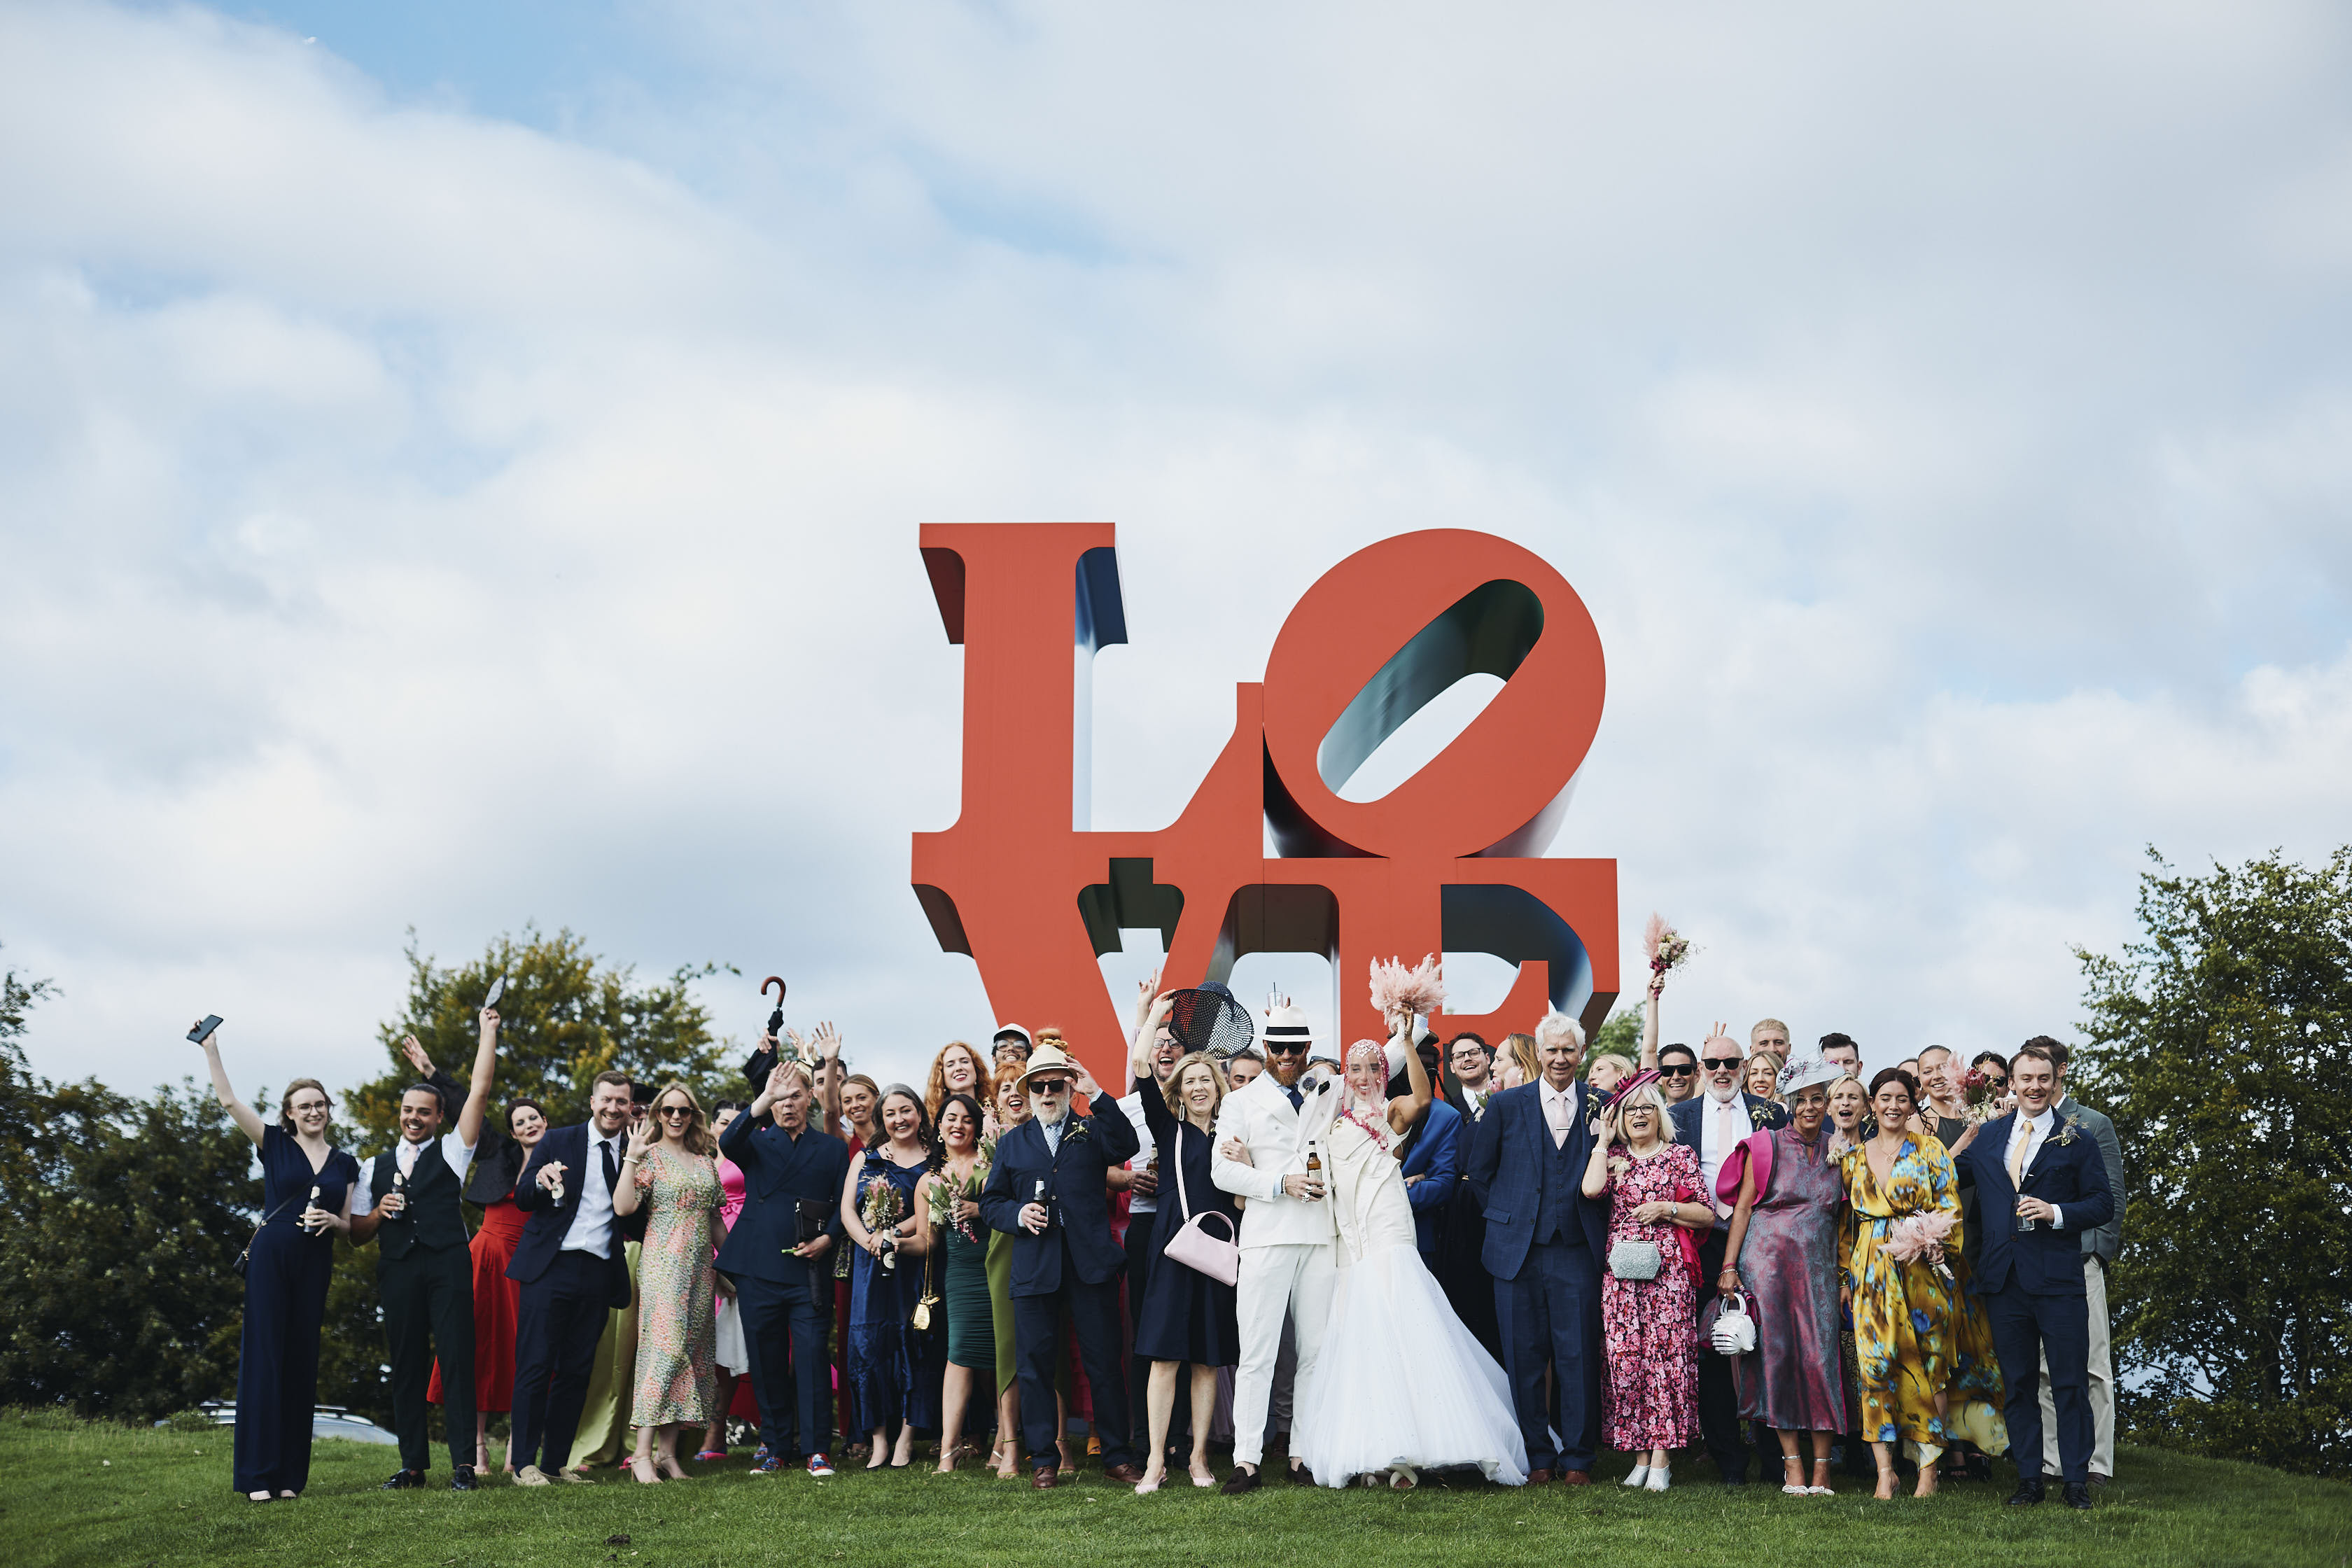 A wedding party, including the bride and groom and guests, standing in front of a large red LOVE sculpture outdoors.